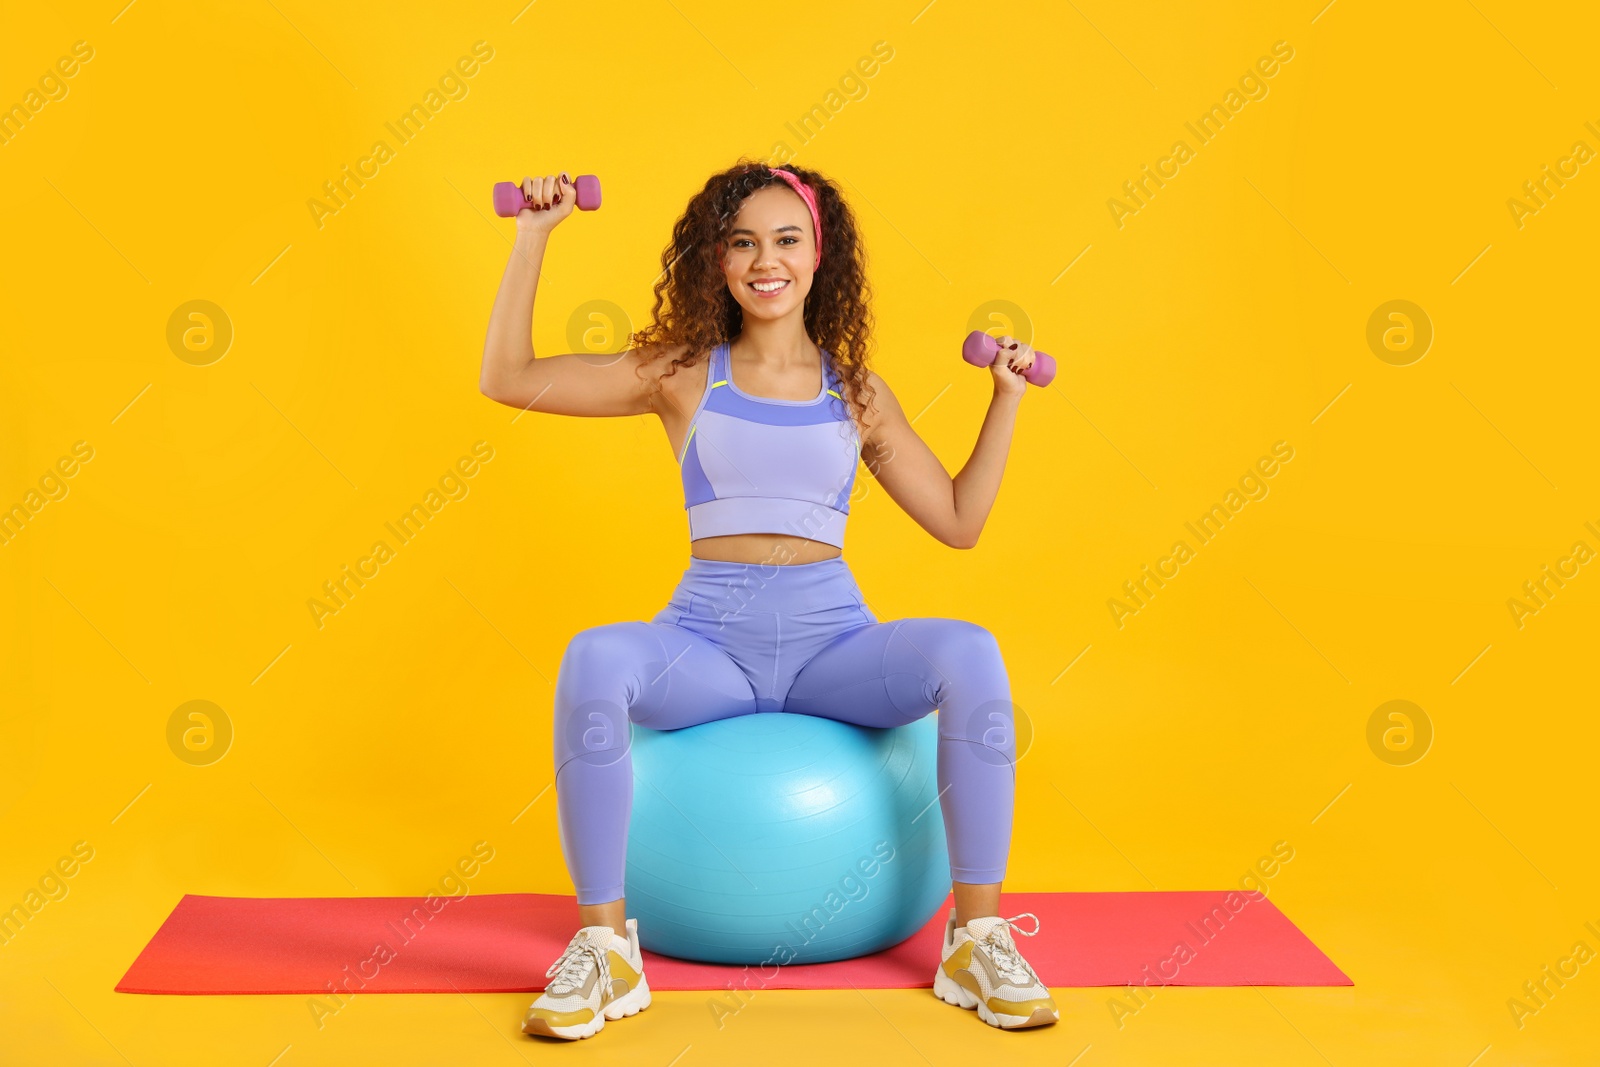 Photo of Beautiful African American woman doing exercise with fitness ball and dumbbells on yoga mat against yellow background